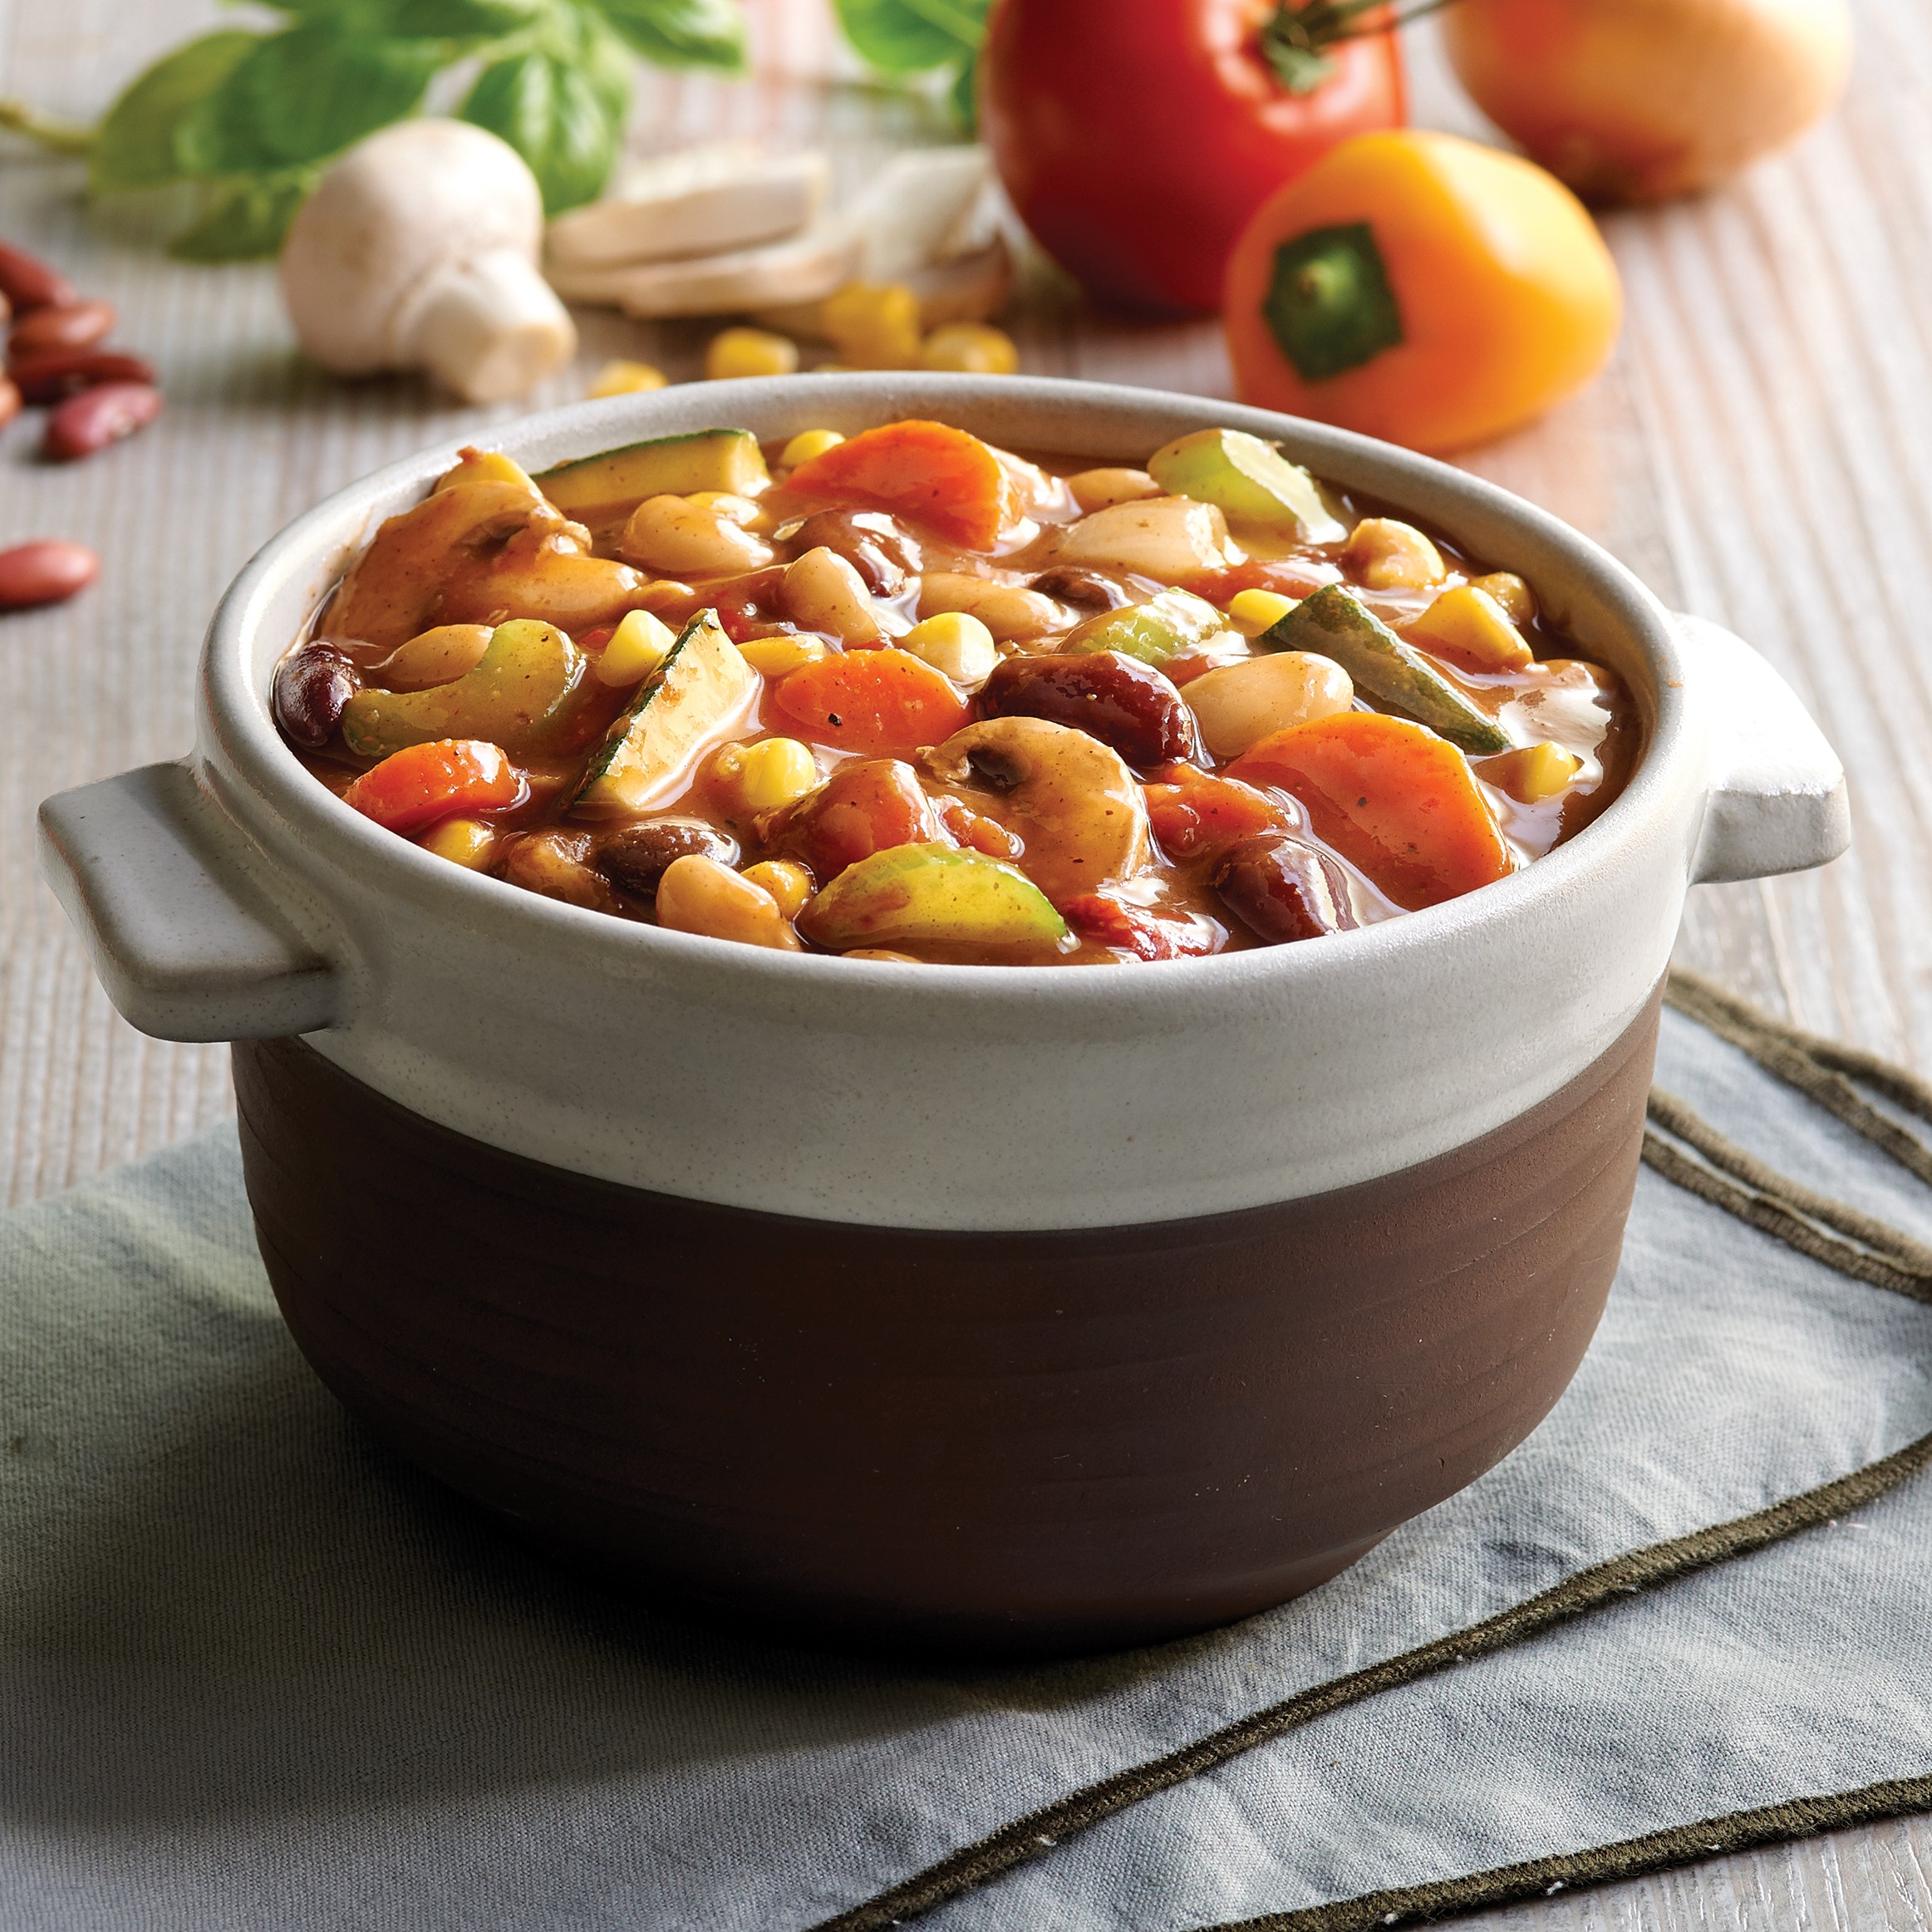 Bowl of foodservice Whitey's Frozen Chili Manufacturers Chipotle Garden Vegetable Chilii in a restaurant setting